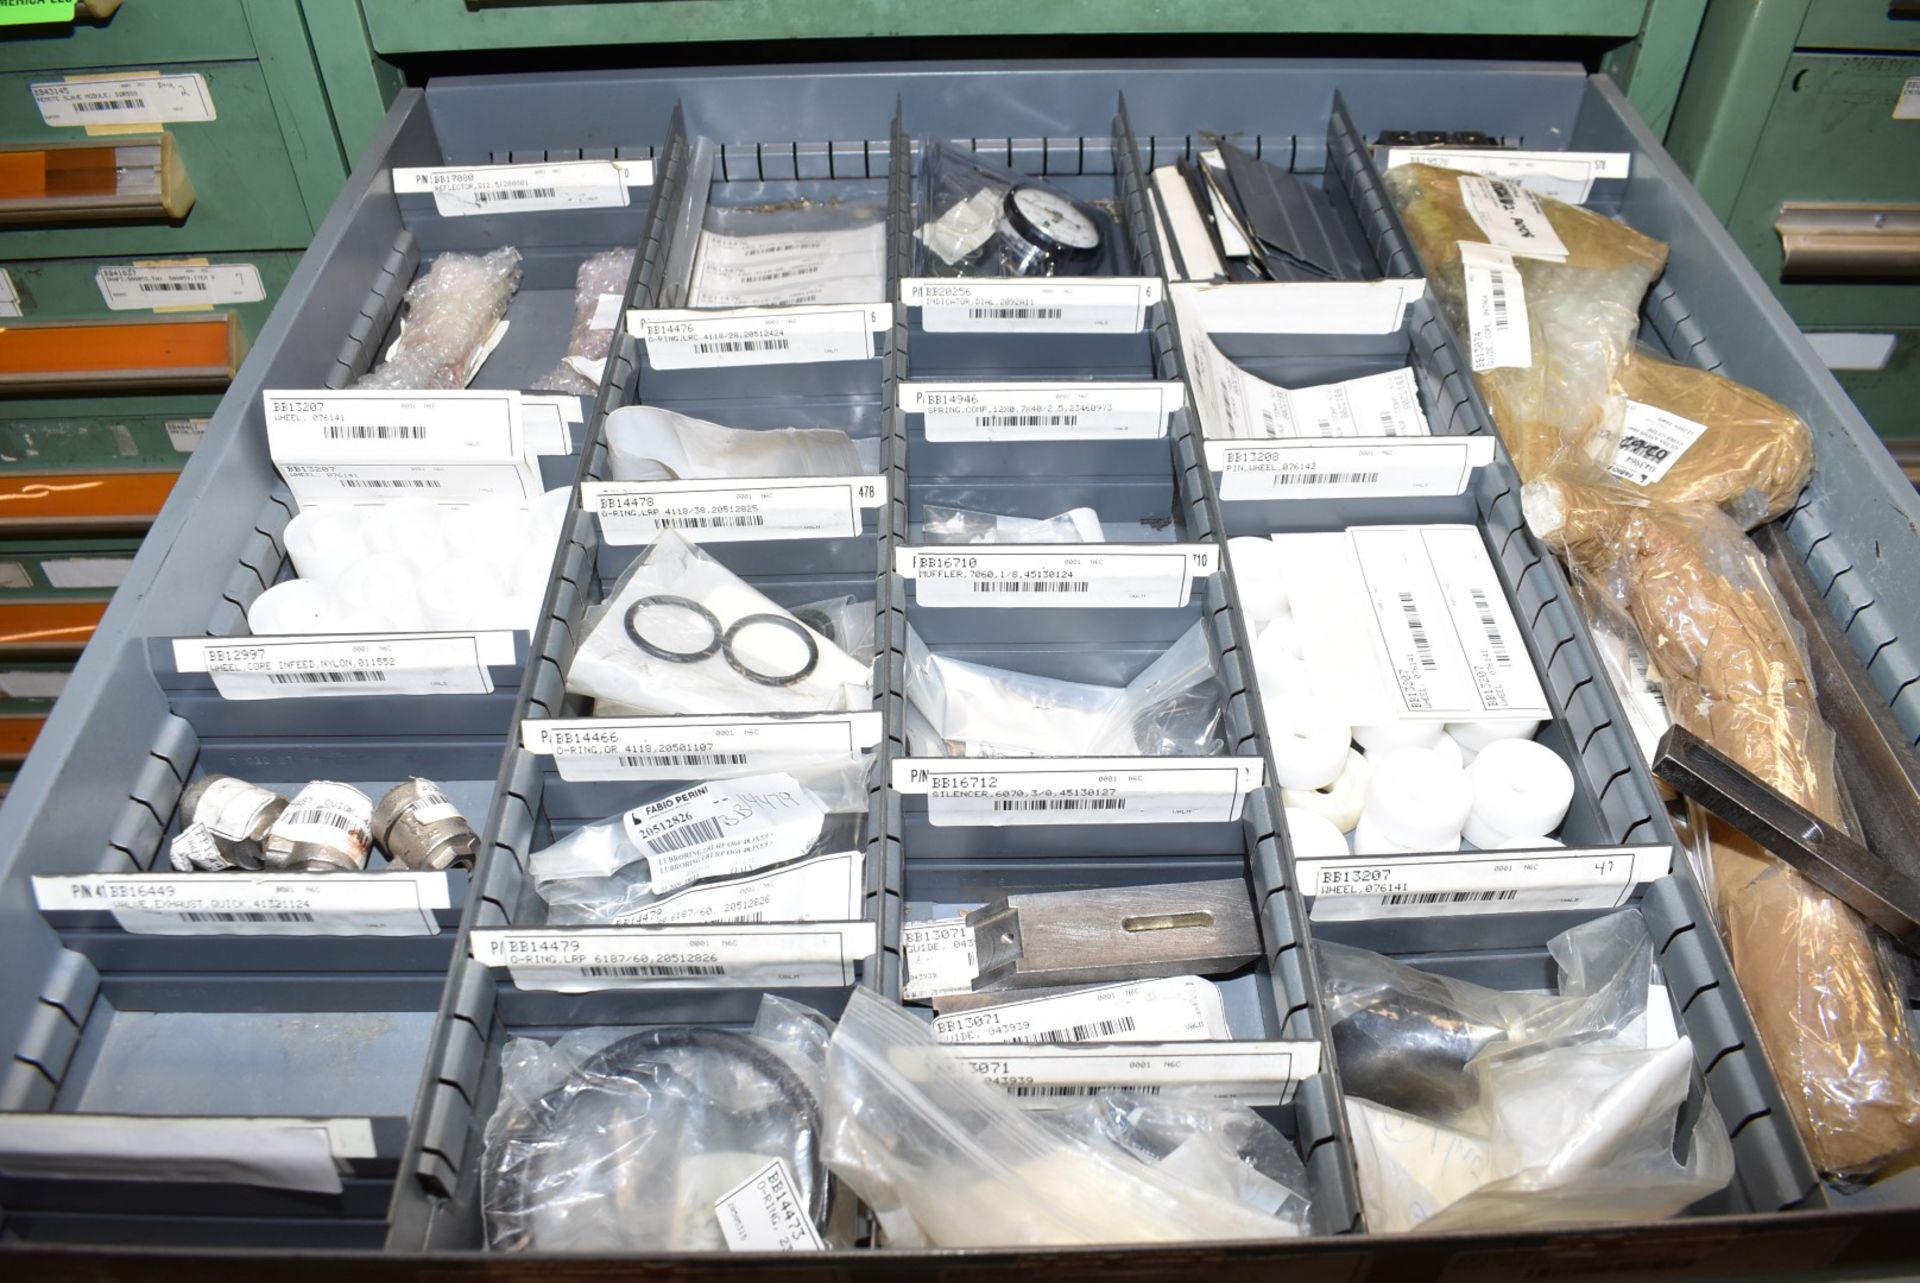 LOT/ CONTENTS OF CABINET - INCLUDING DISC LINING, O-RINGS, ELECTRICAL COMPONENTS, SPROCKETS, - Image 3 of 8